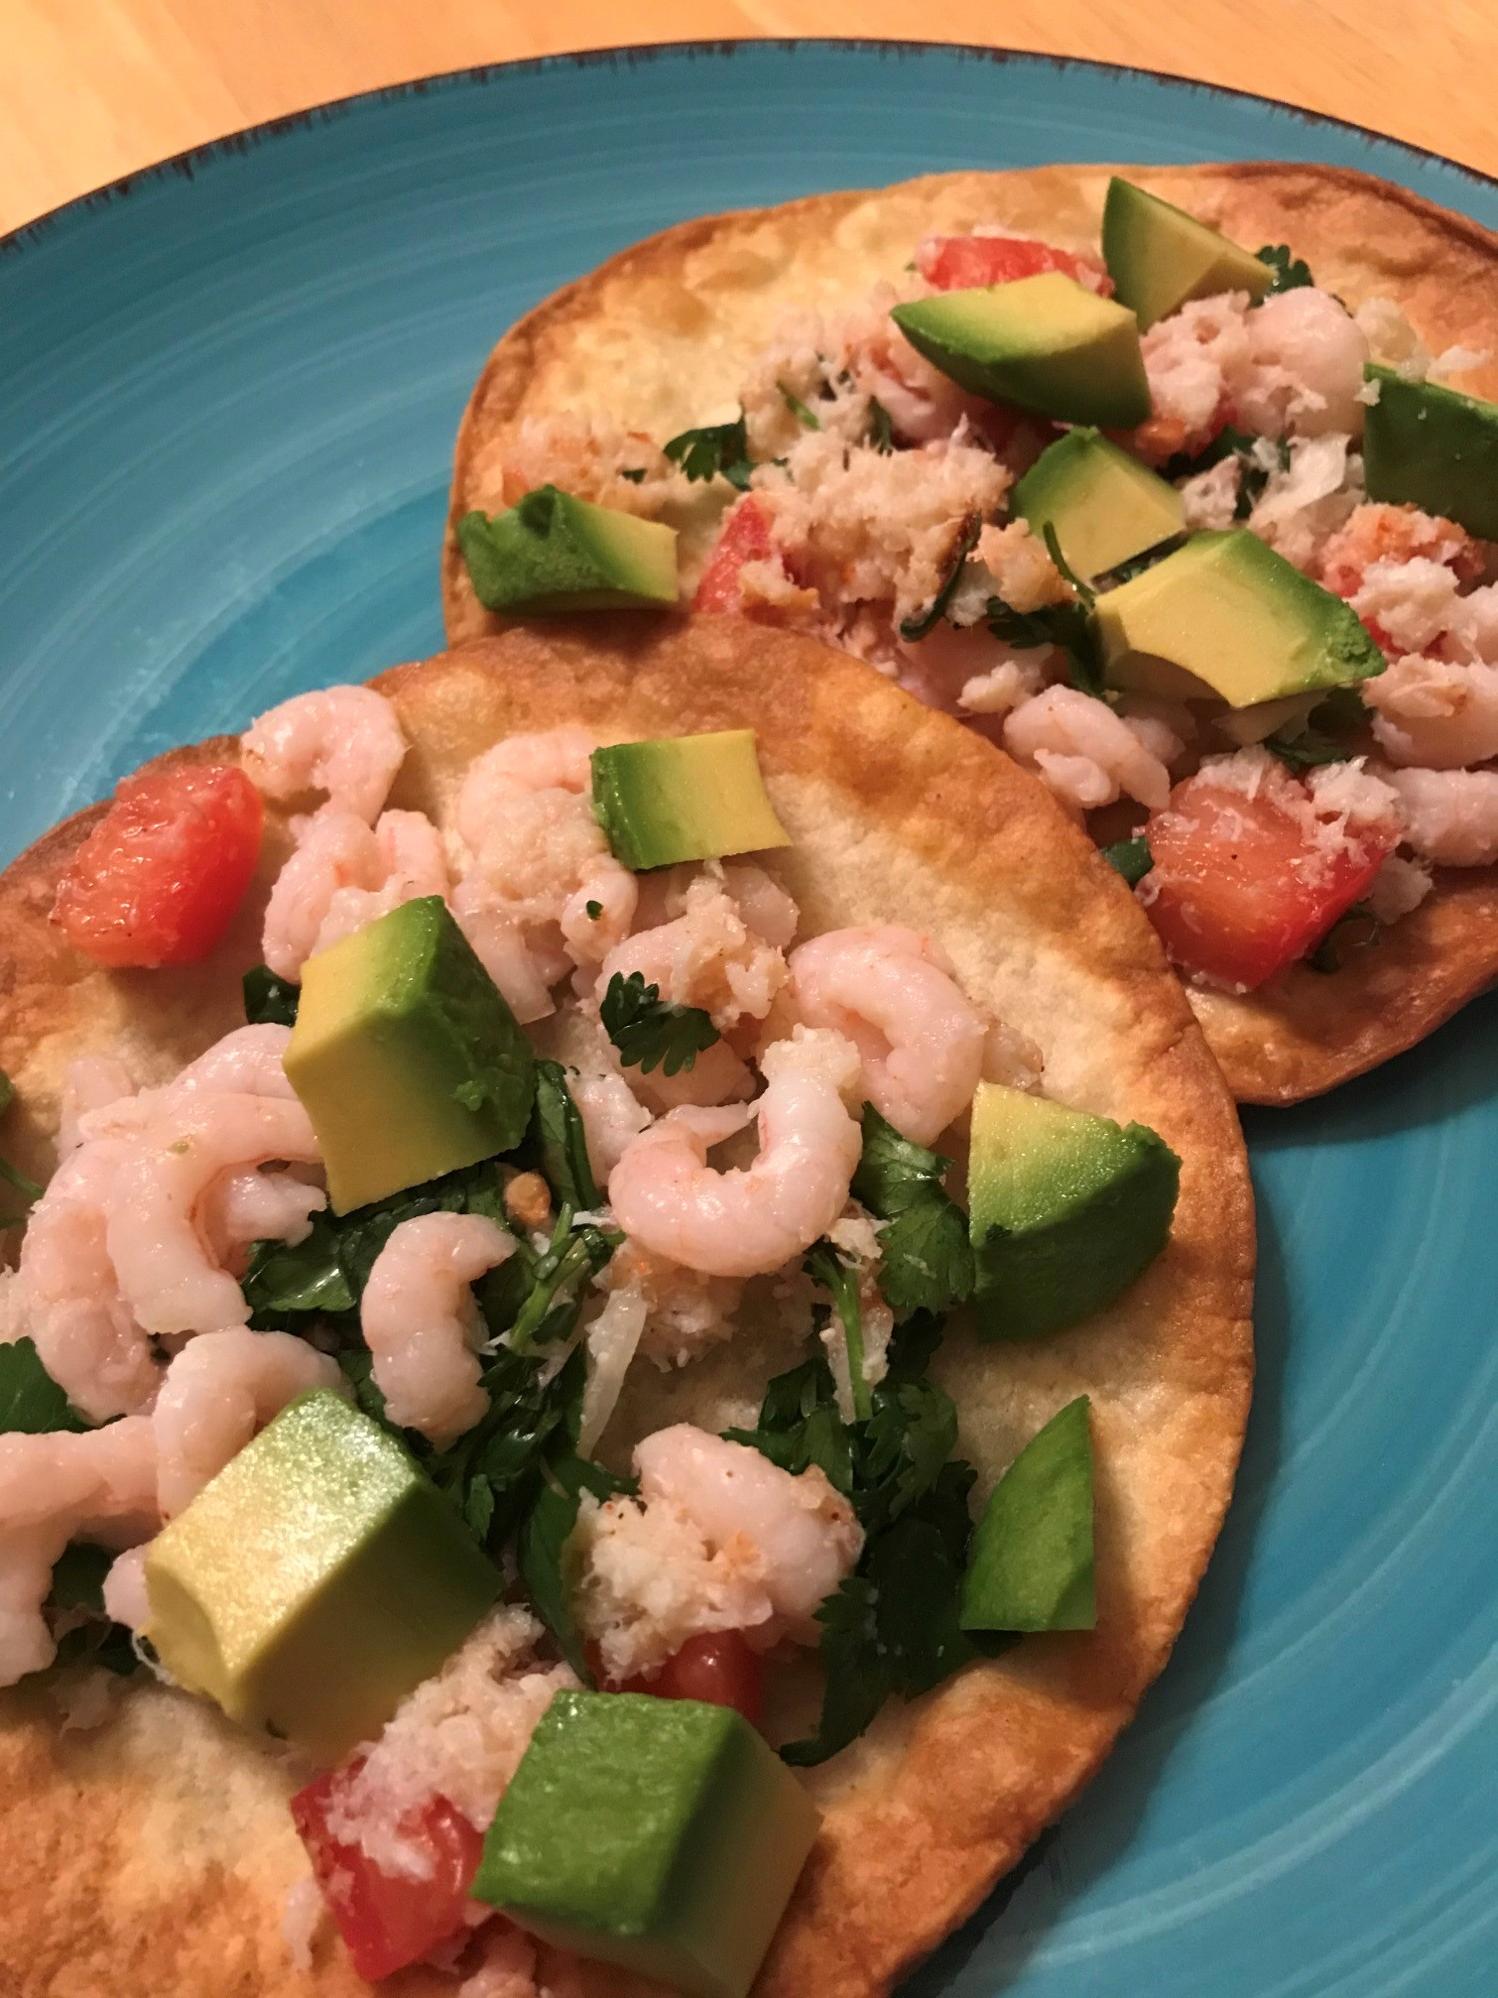  Take your taste buds on a trip to the beach with this ceviche.